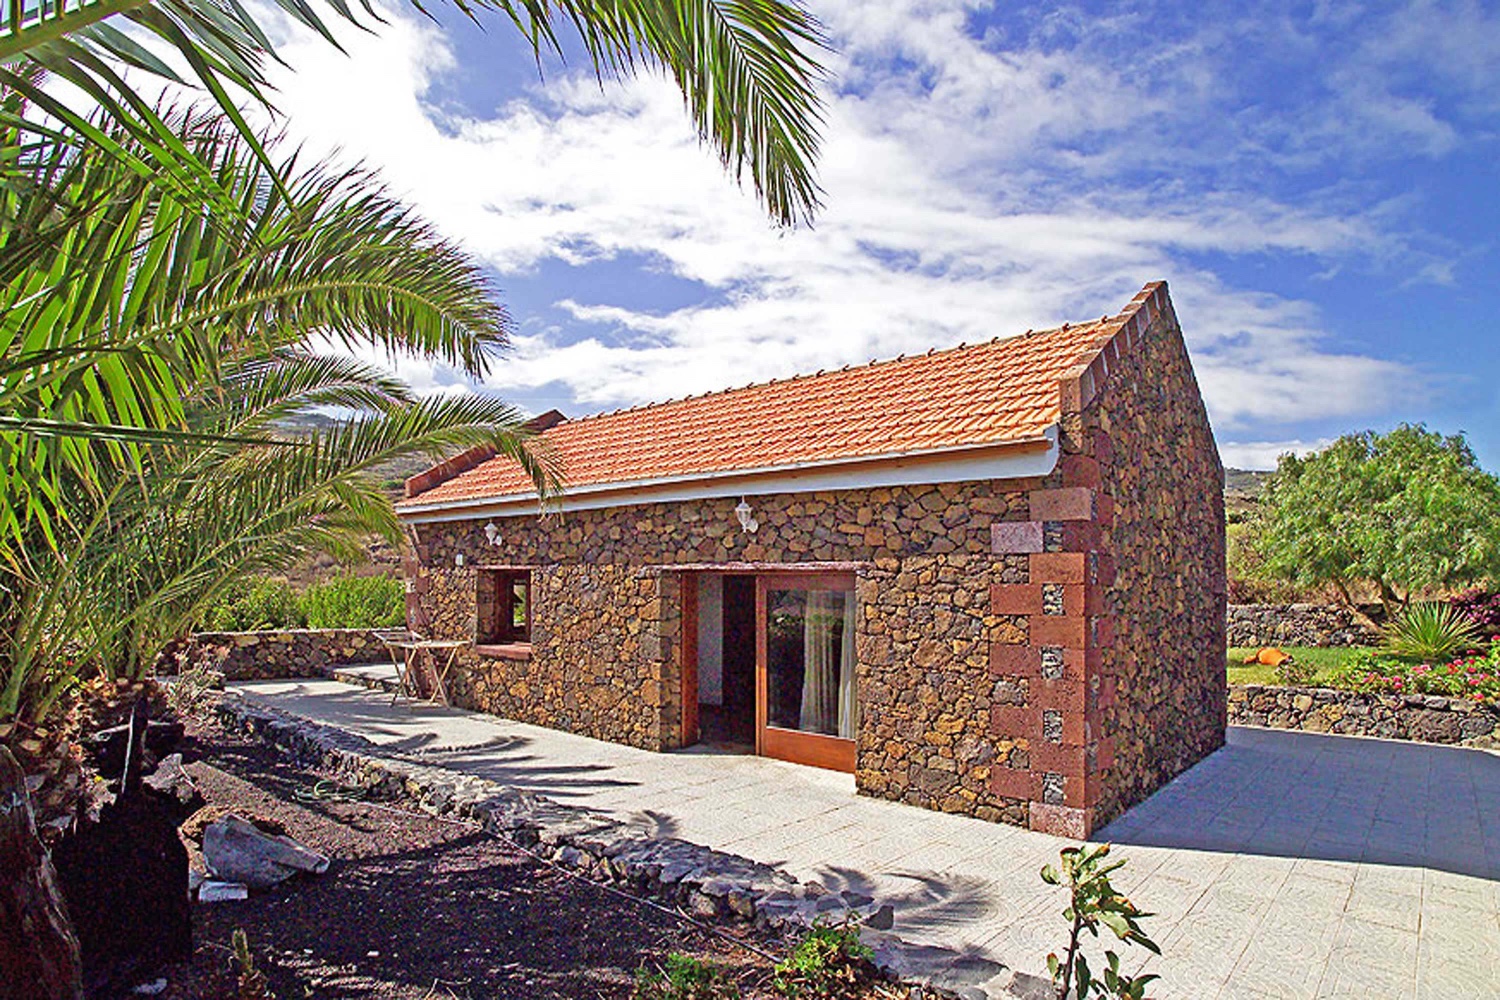 Rustic holiday house with nice garden area, an oasis of relaxation to enjoy a very special hiking holiday on La Gomera